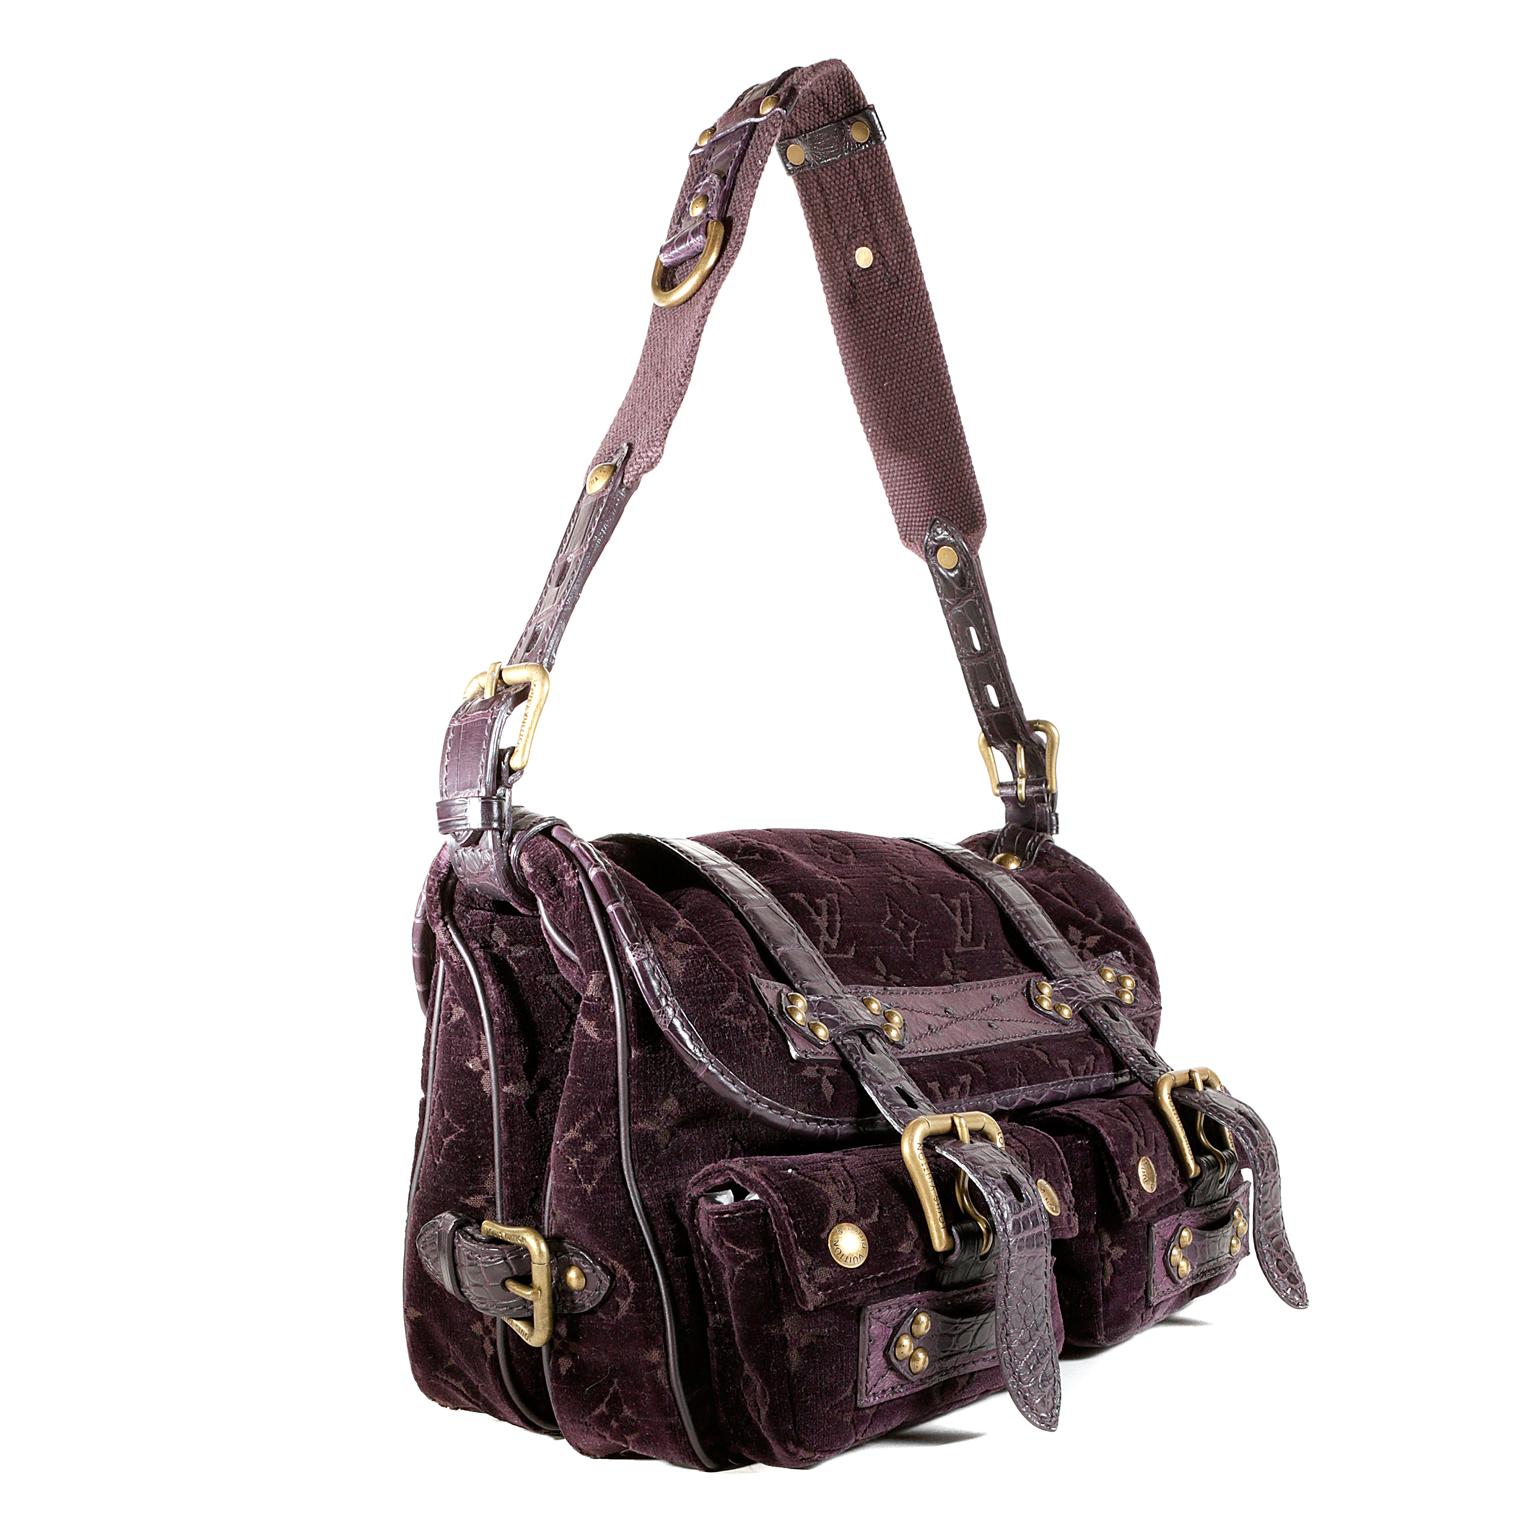 Louis Vuitton Eggplant Monogram Velours Clyde Bag- Pristine and Unworn
From the 2004 Collection, it combines plush fabric with exotic accents.  
Eggplant purple velour is subtly imprinted with signature Louis Vuitton monogram.  Alligator belts and